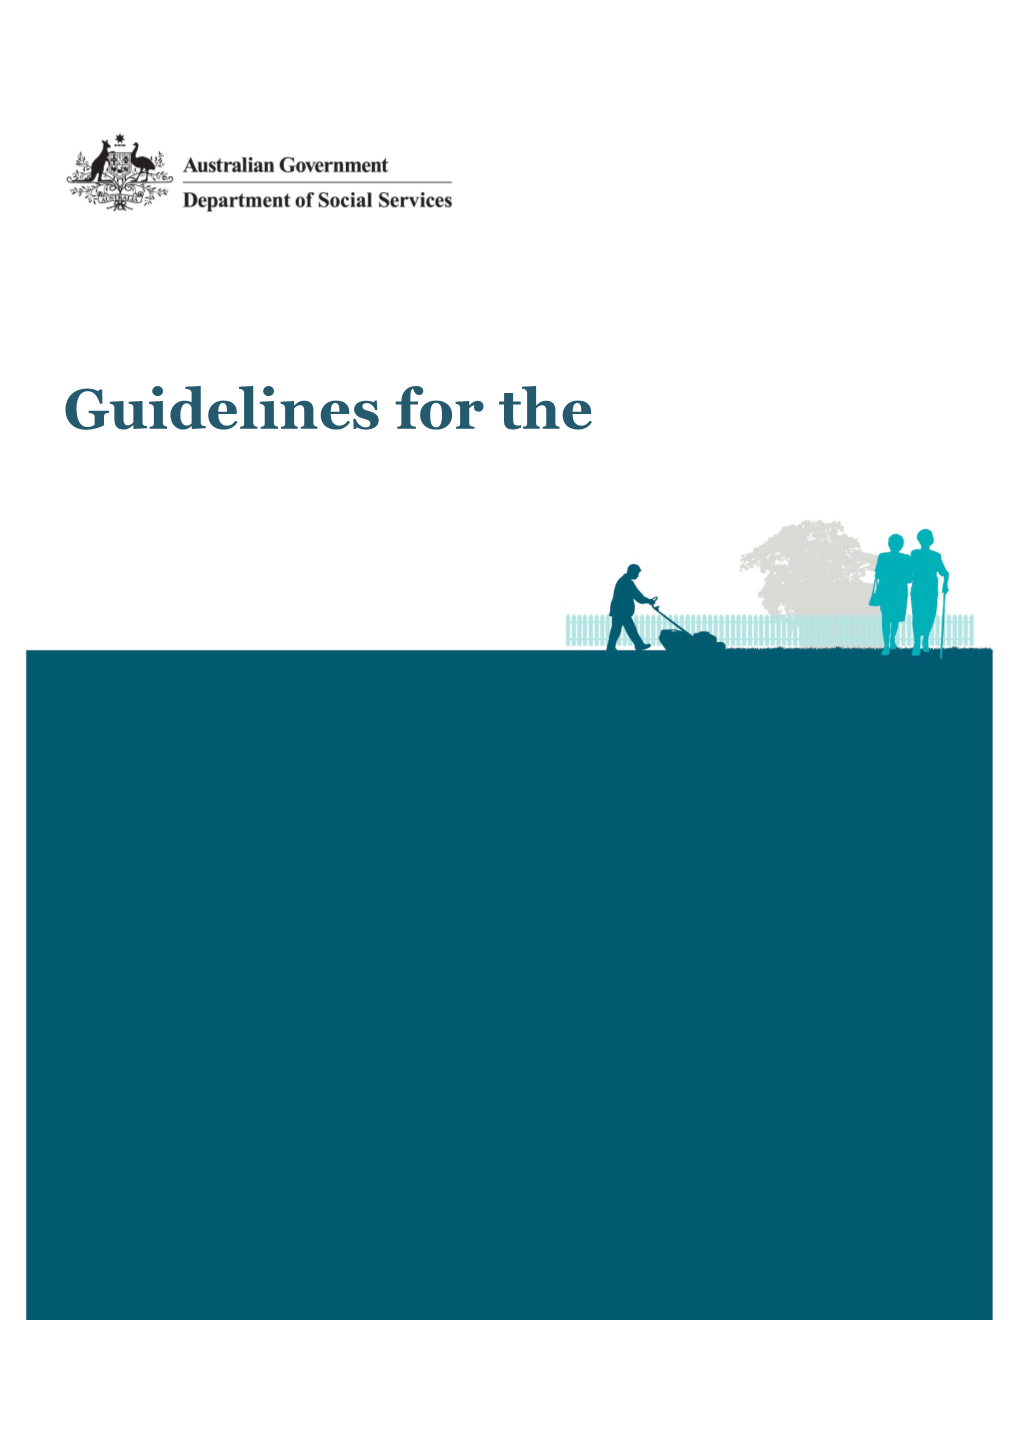 Guidelines for the Aged Care Complaints Scheme